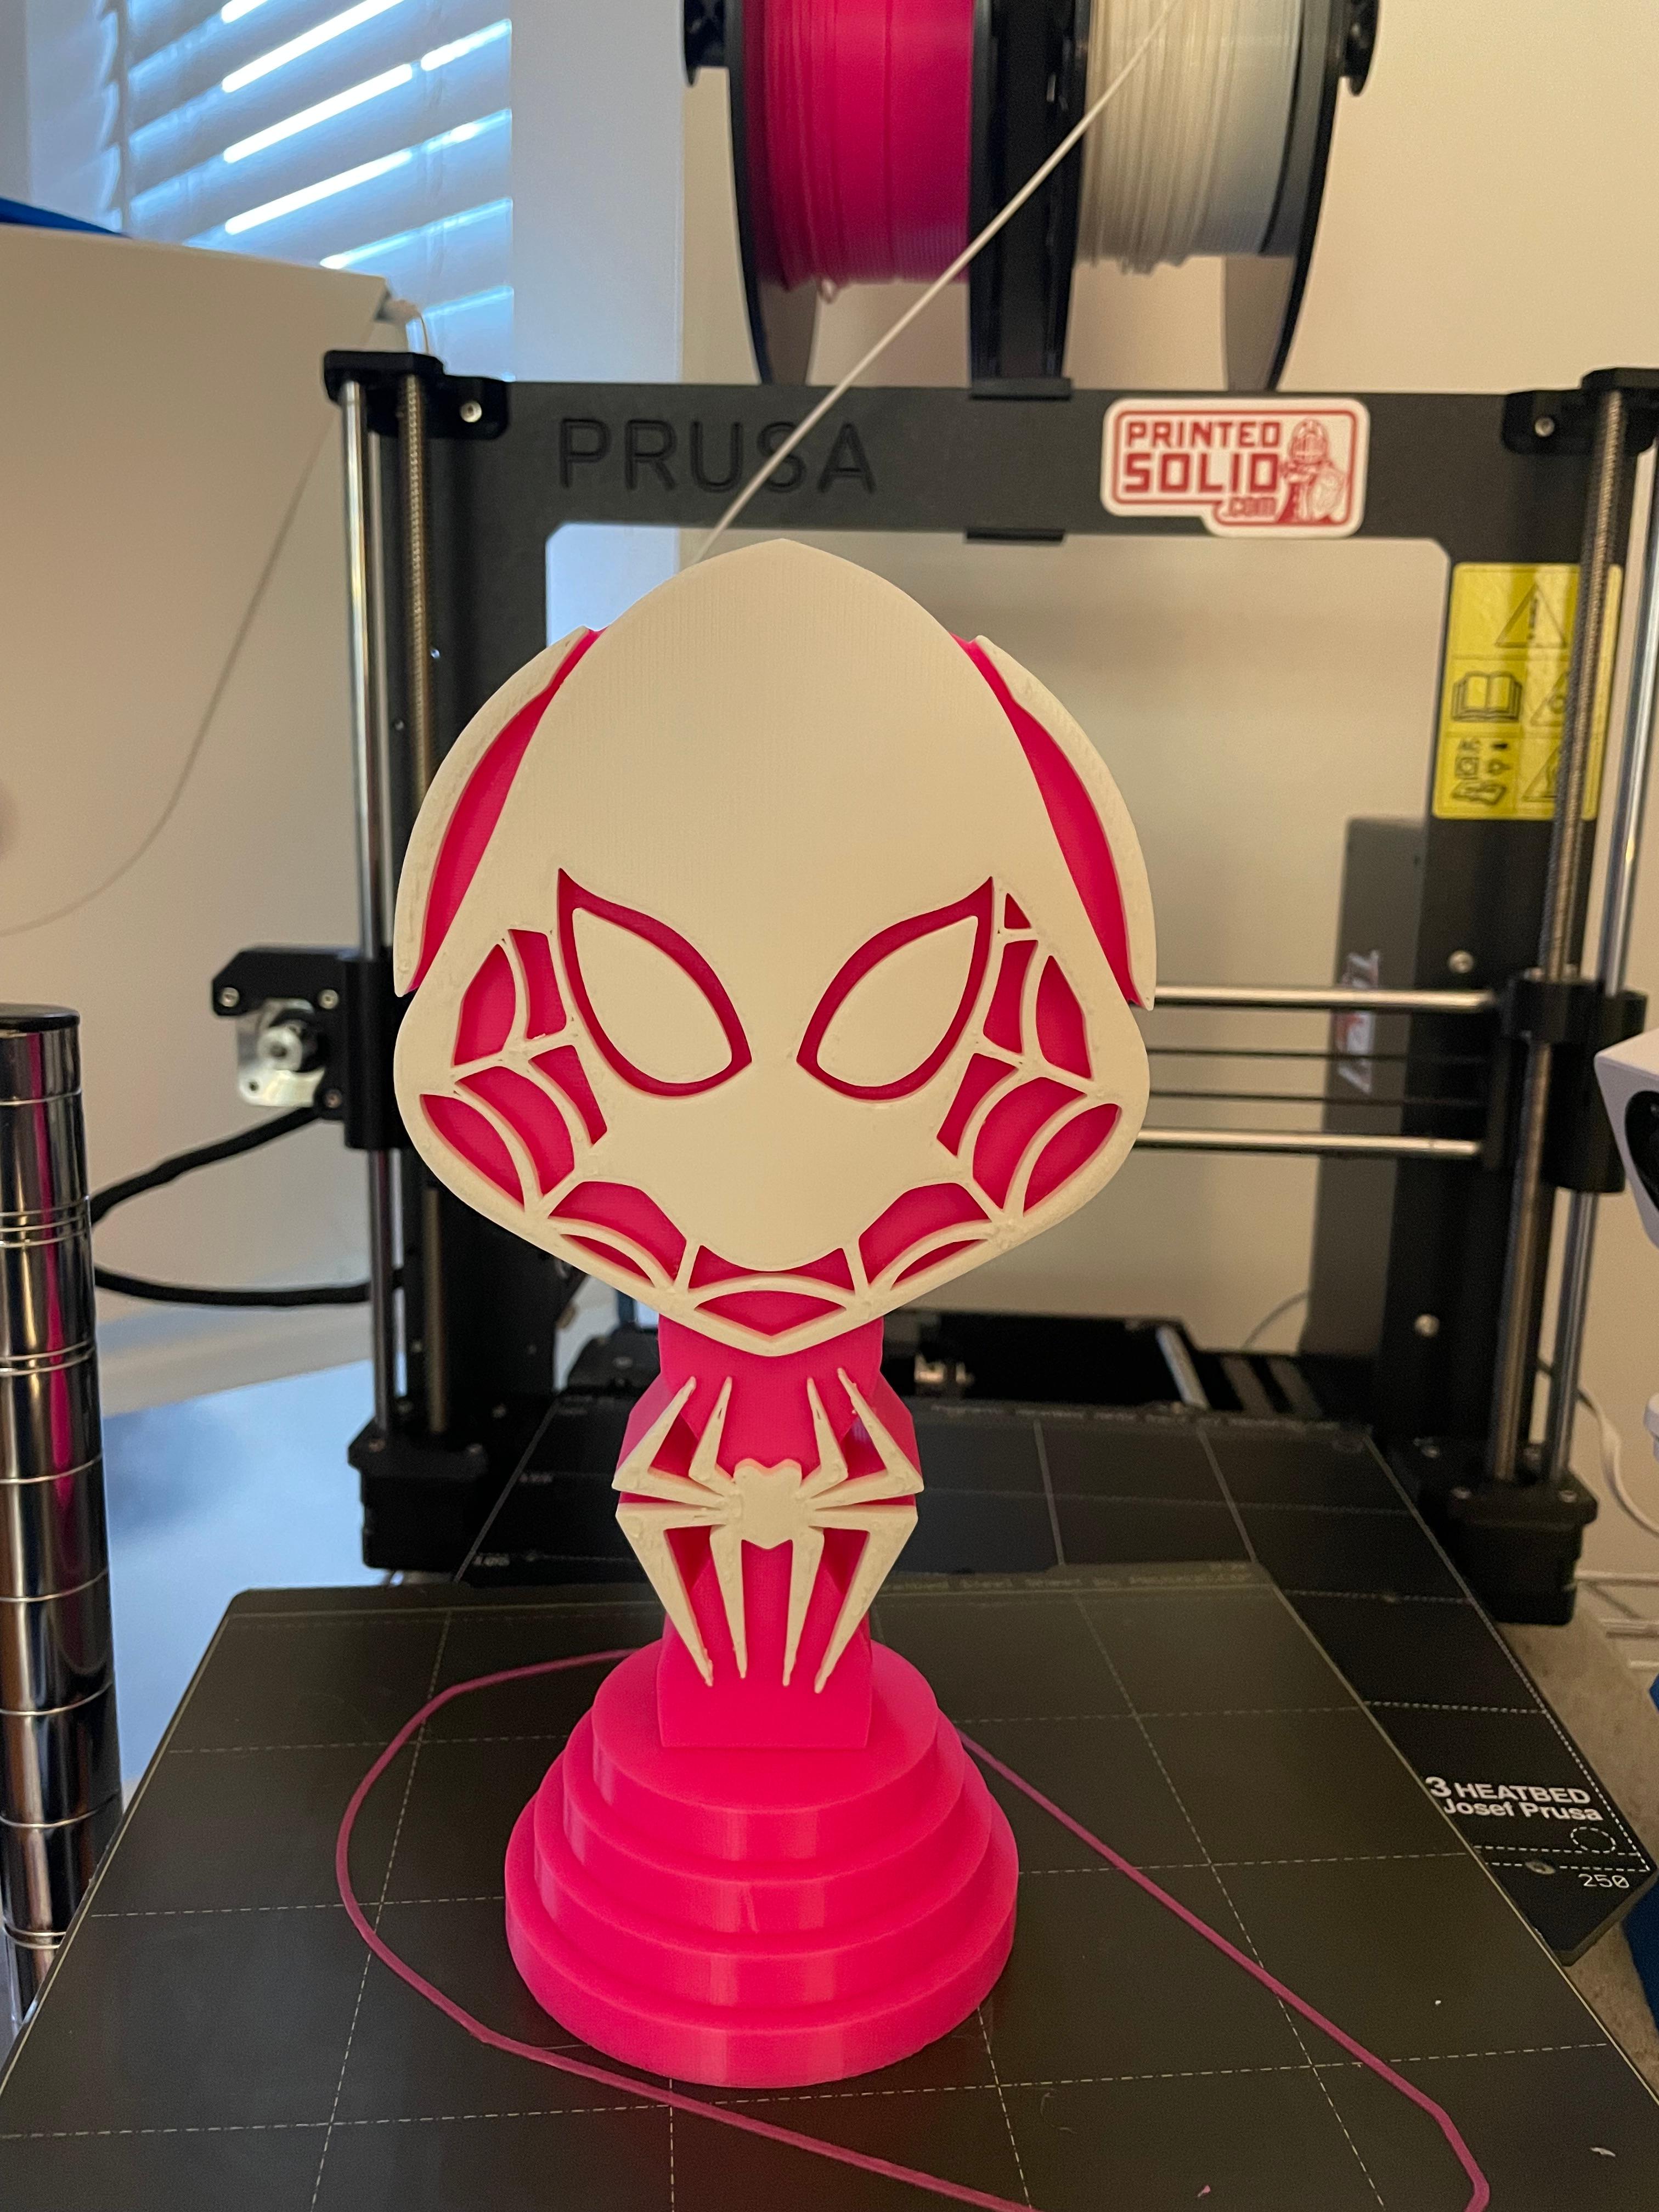 Spider Gwen Headphone Stand - Spider-Gwen is one of my favorite Spider characters, i just had to print this! 

Printed on a Prusa Mk3s+ with a .6mm nozzle and .2mm layer height. Printed in American Filament's Neon Pink and Printed Solid's Jessie Quarter White PLA. - 3d model